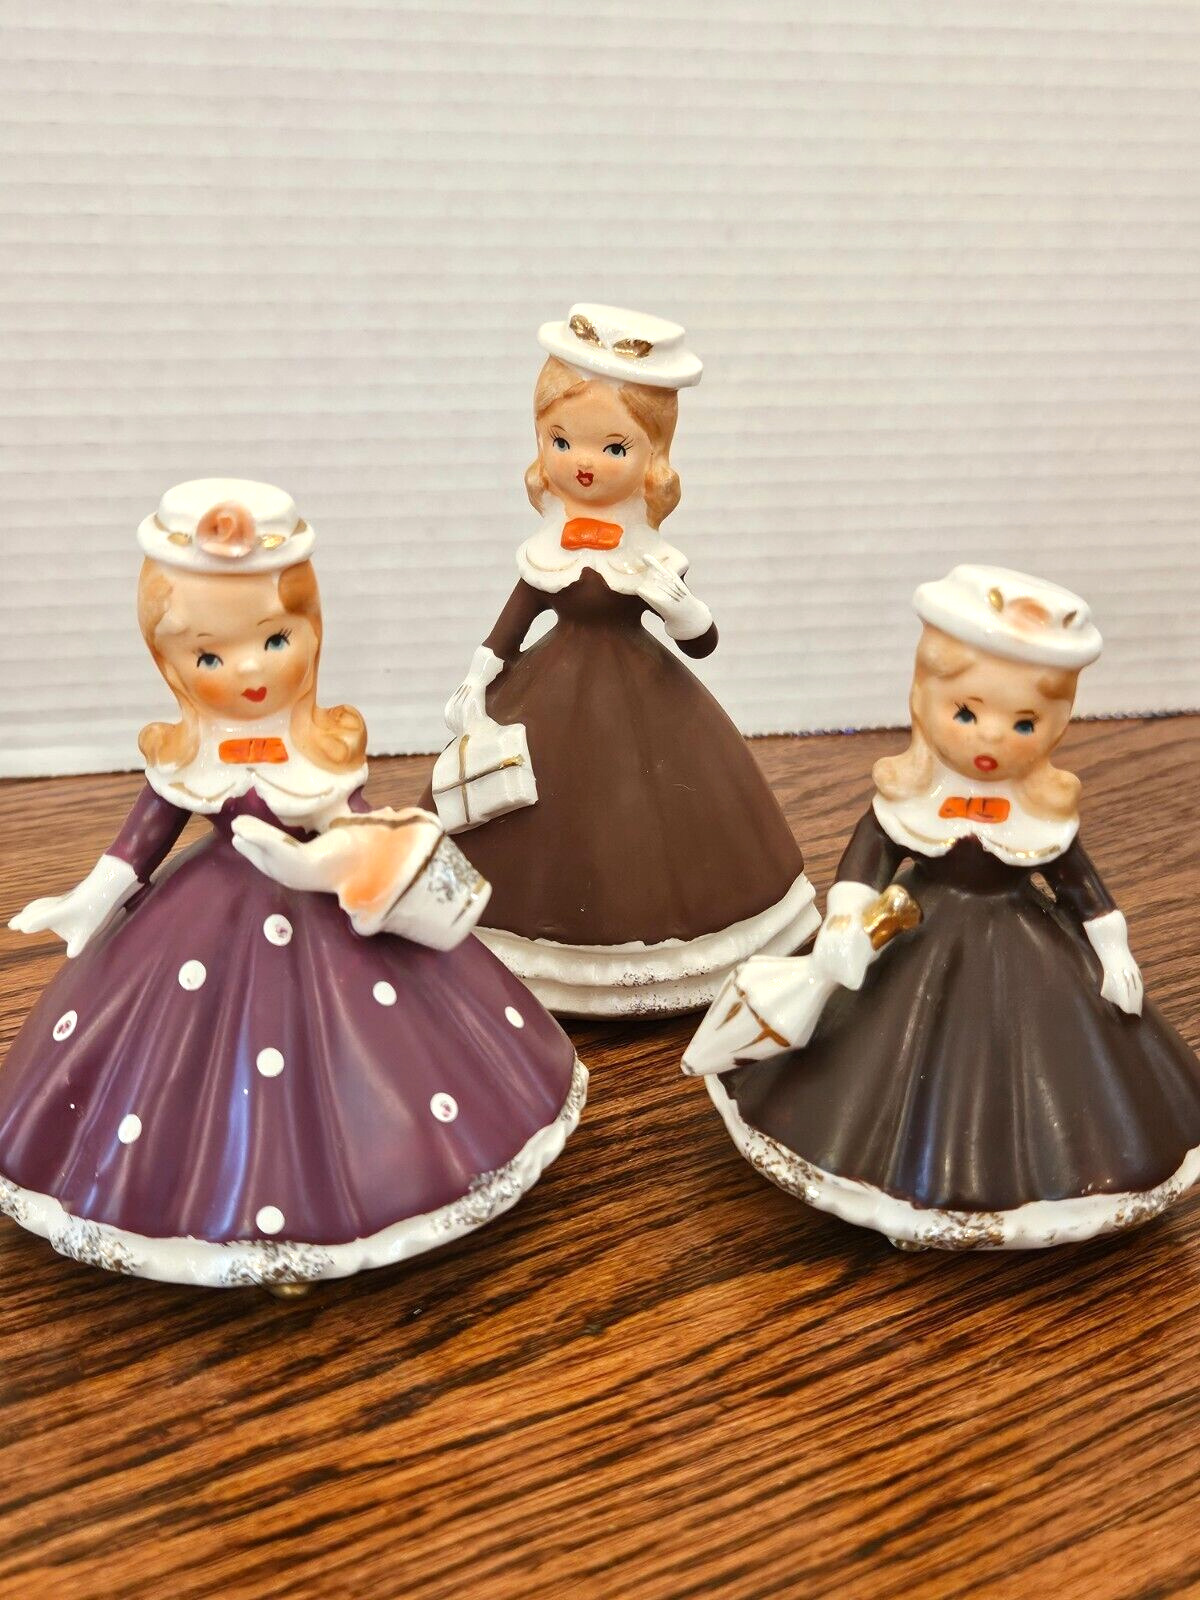 Vintage 1950\'s Japan Rare Figurines  Shopping Girls Dressed in Sunday Best